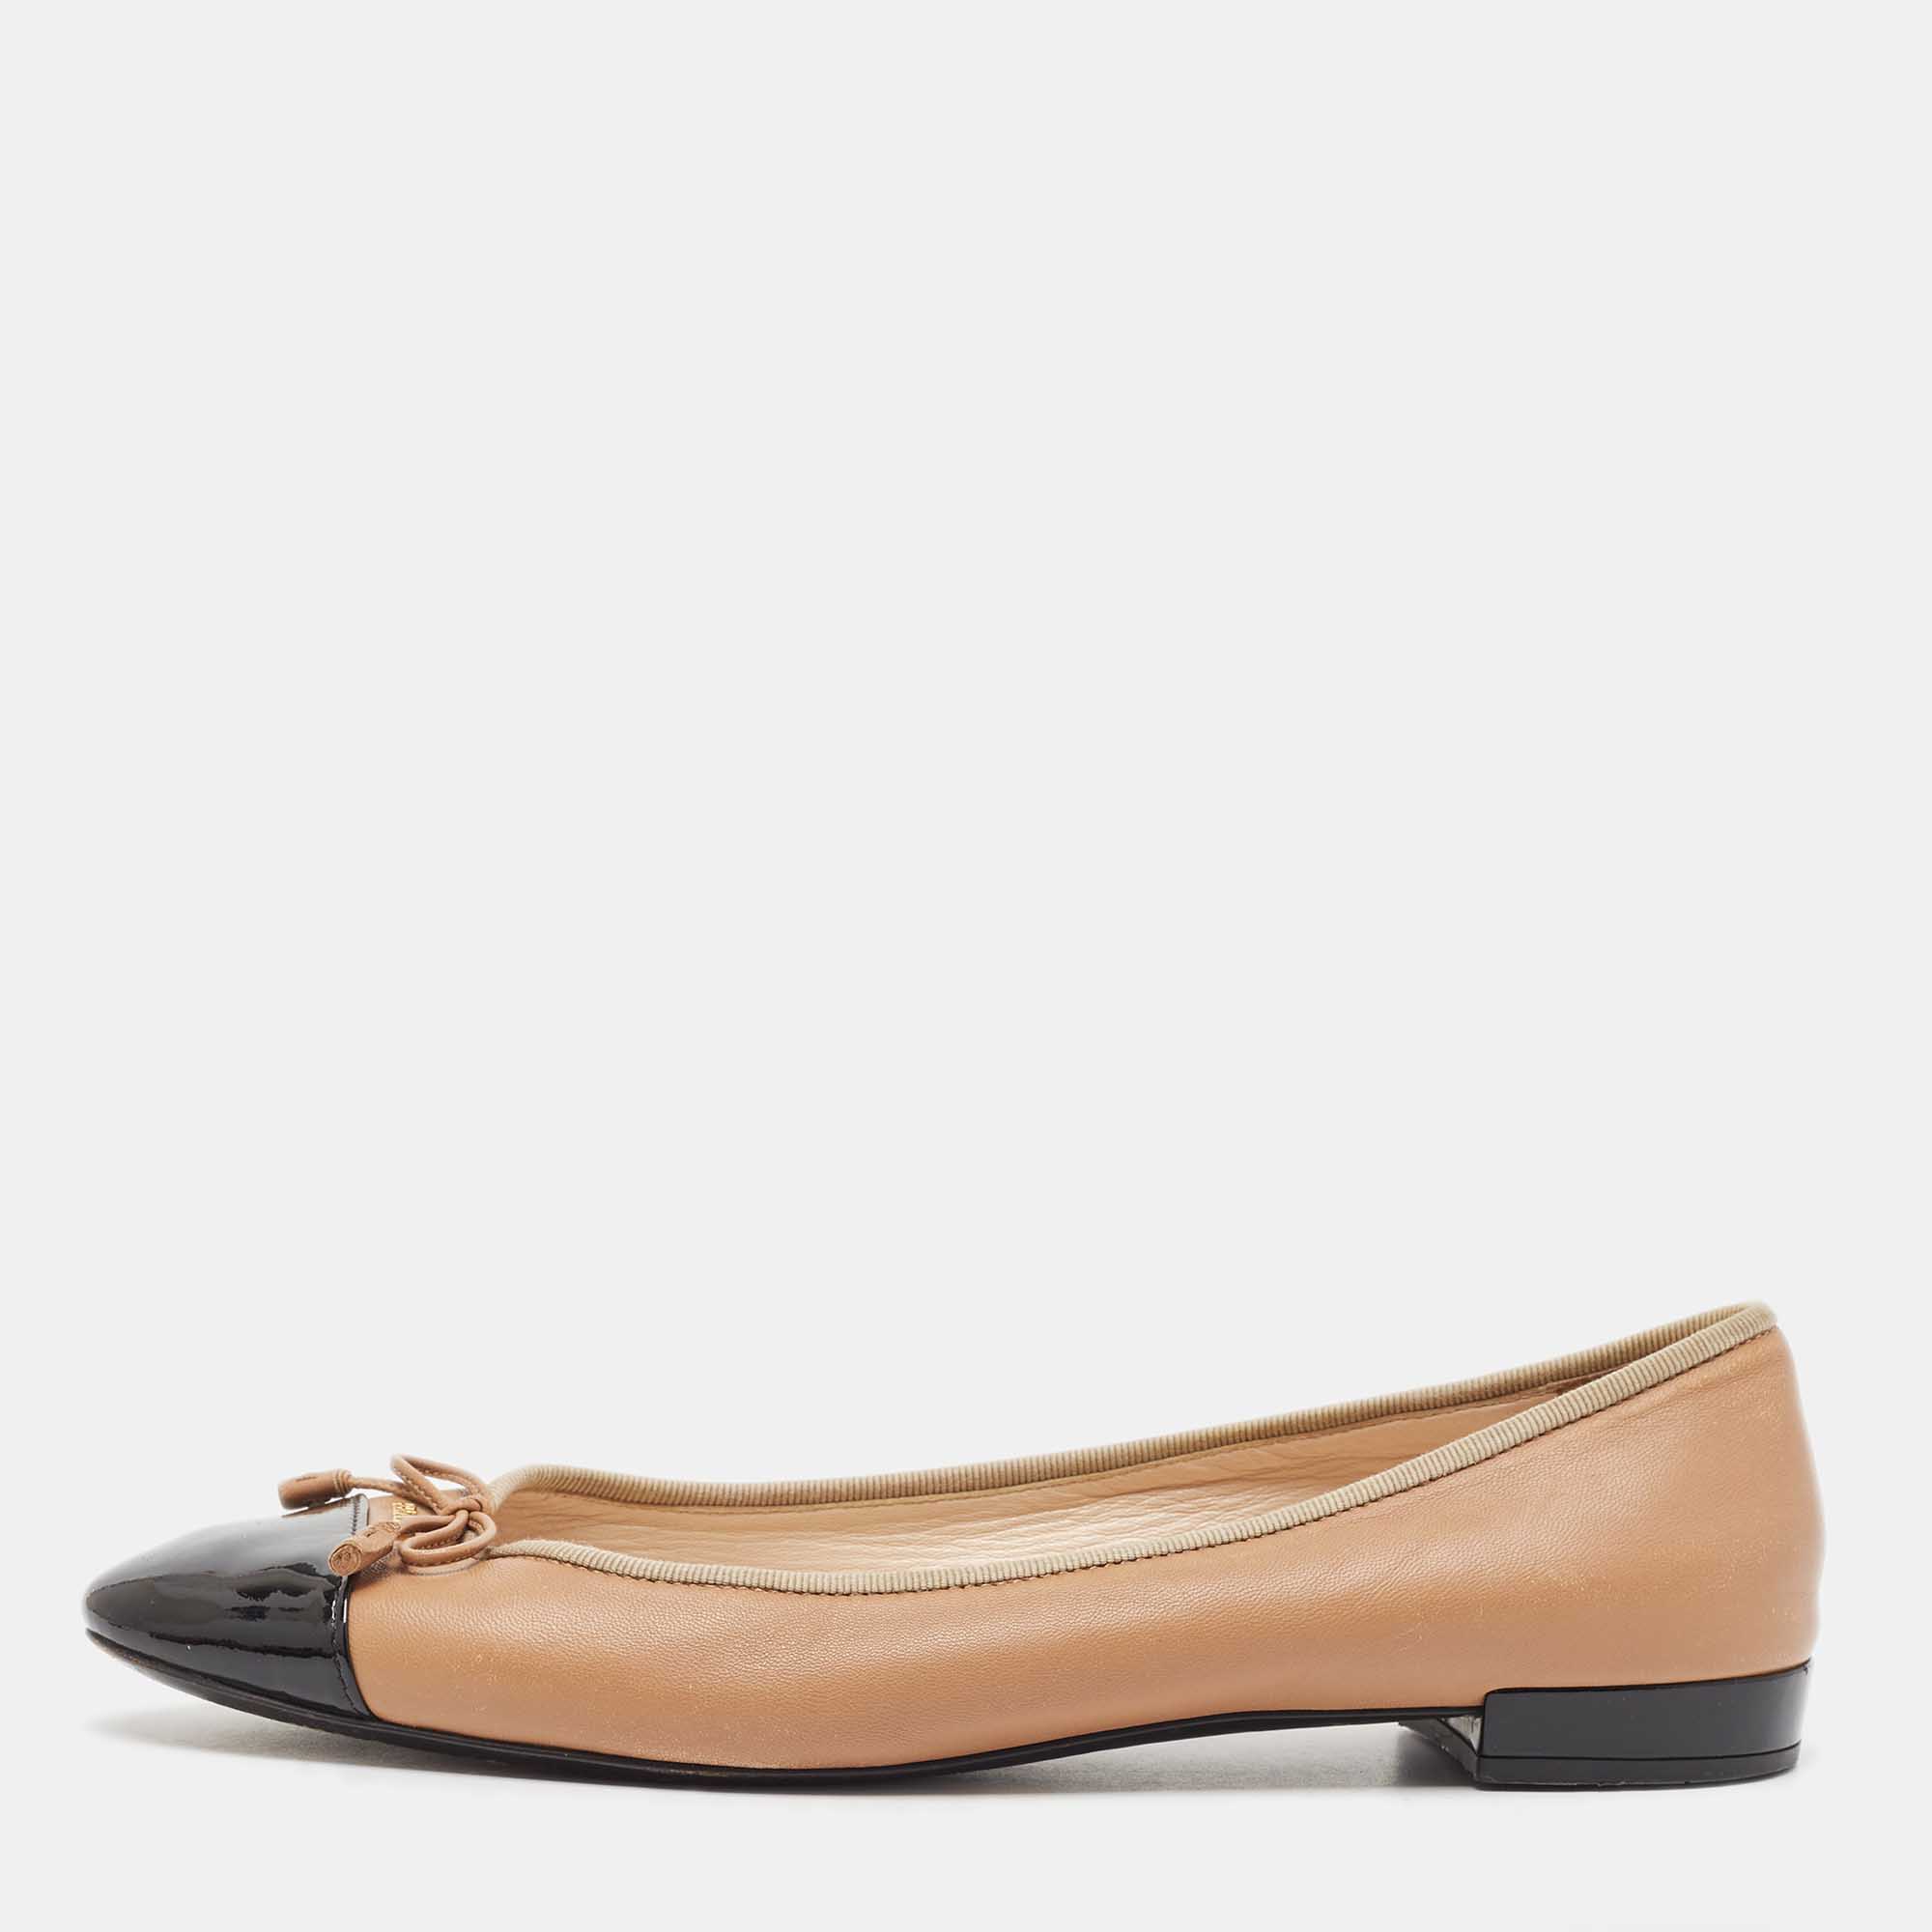 Prada Brown Leather Bow Ballet Flats Size 40